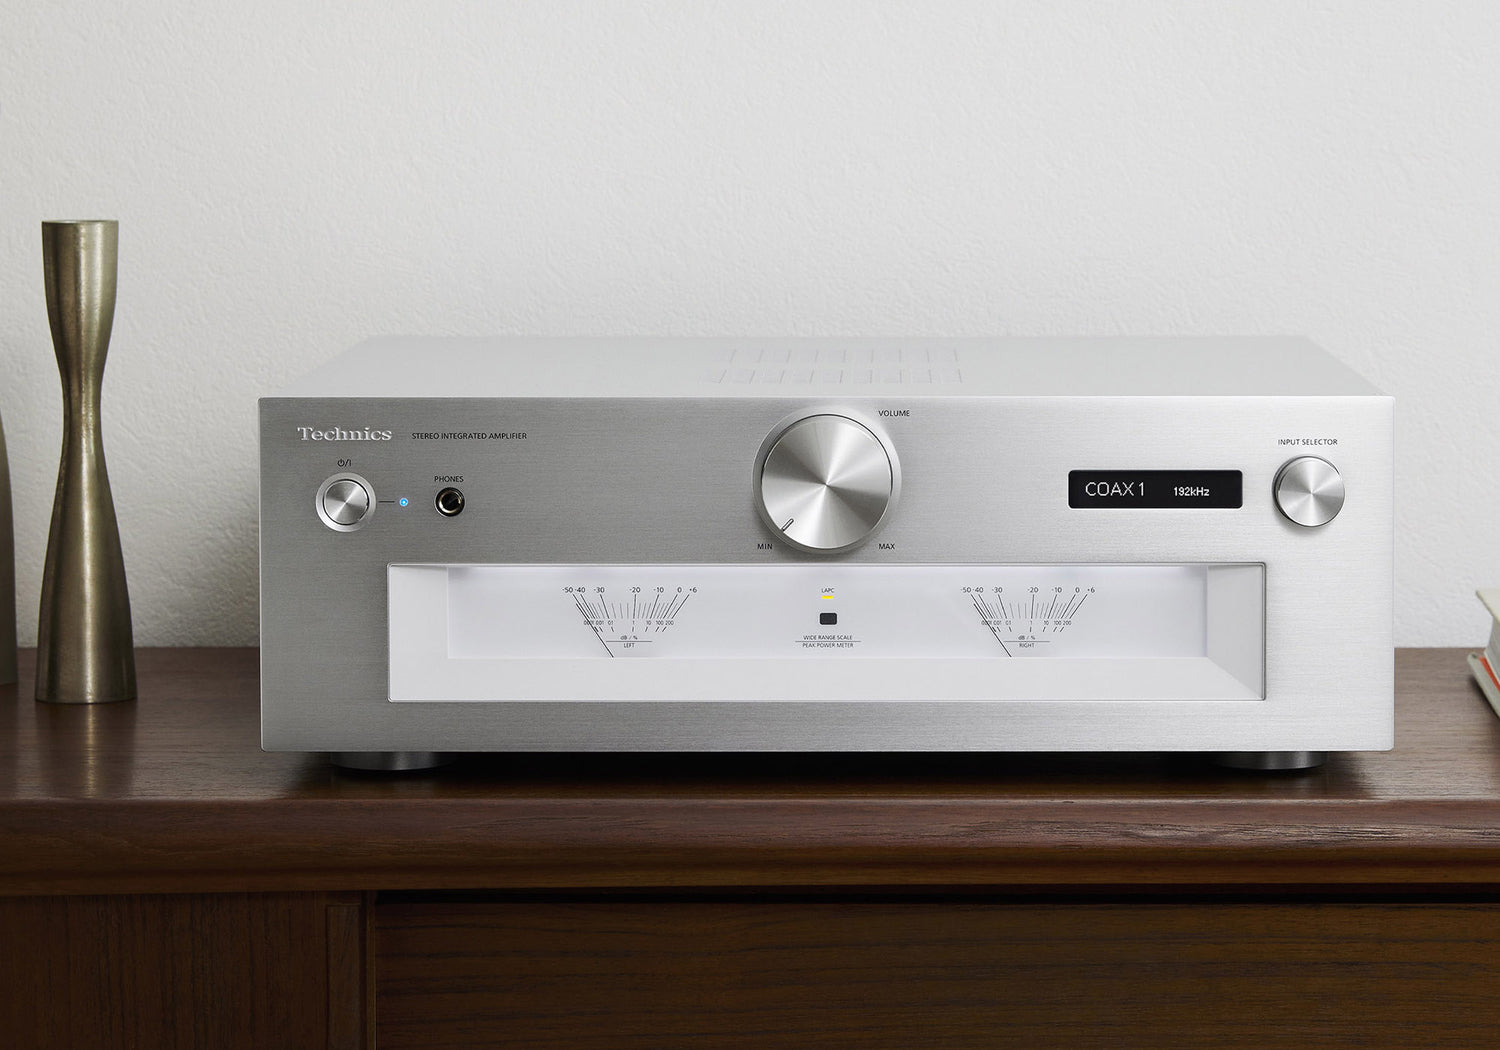 Technics Announces the SU-G700M2 Integrated Amplifier as Successor of the Highly Acclaimed SU-G700